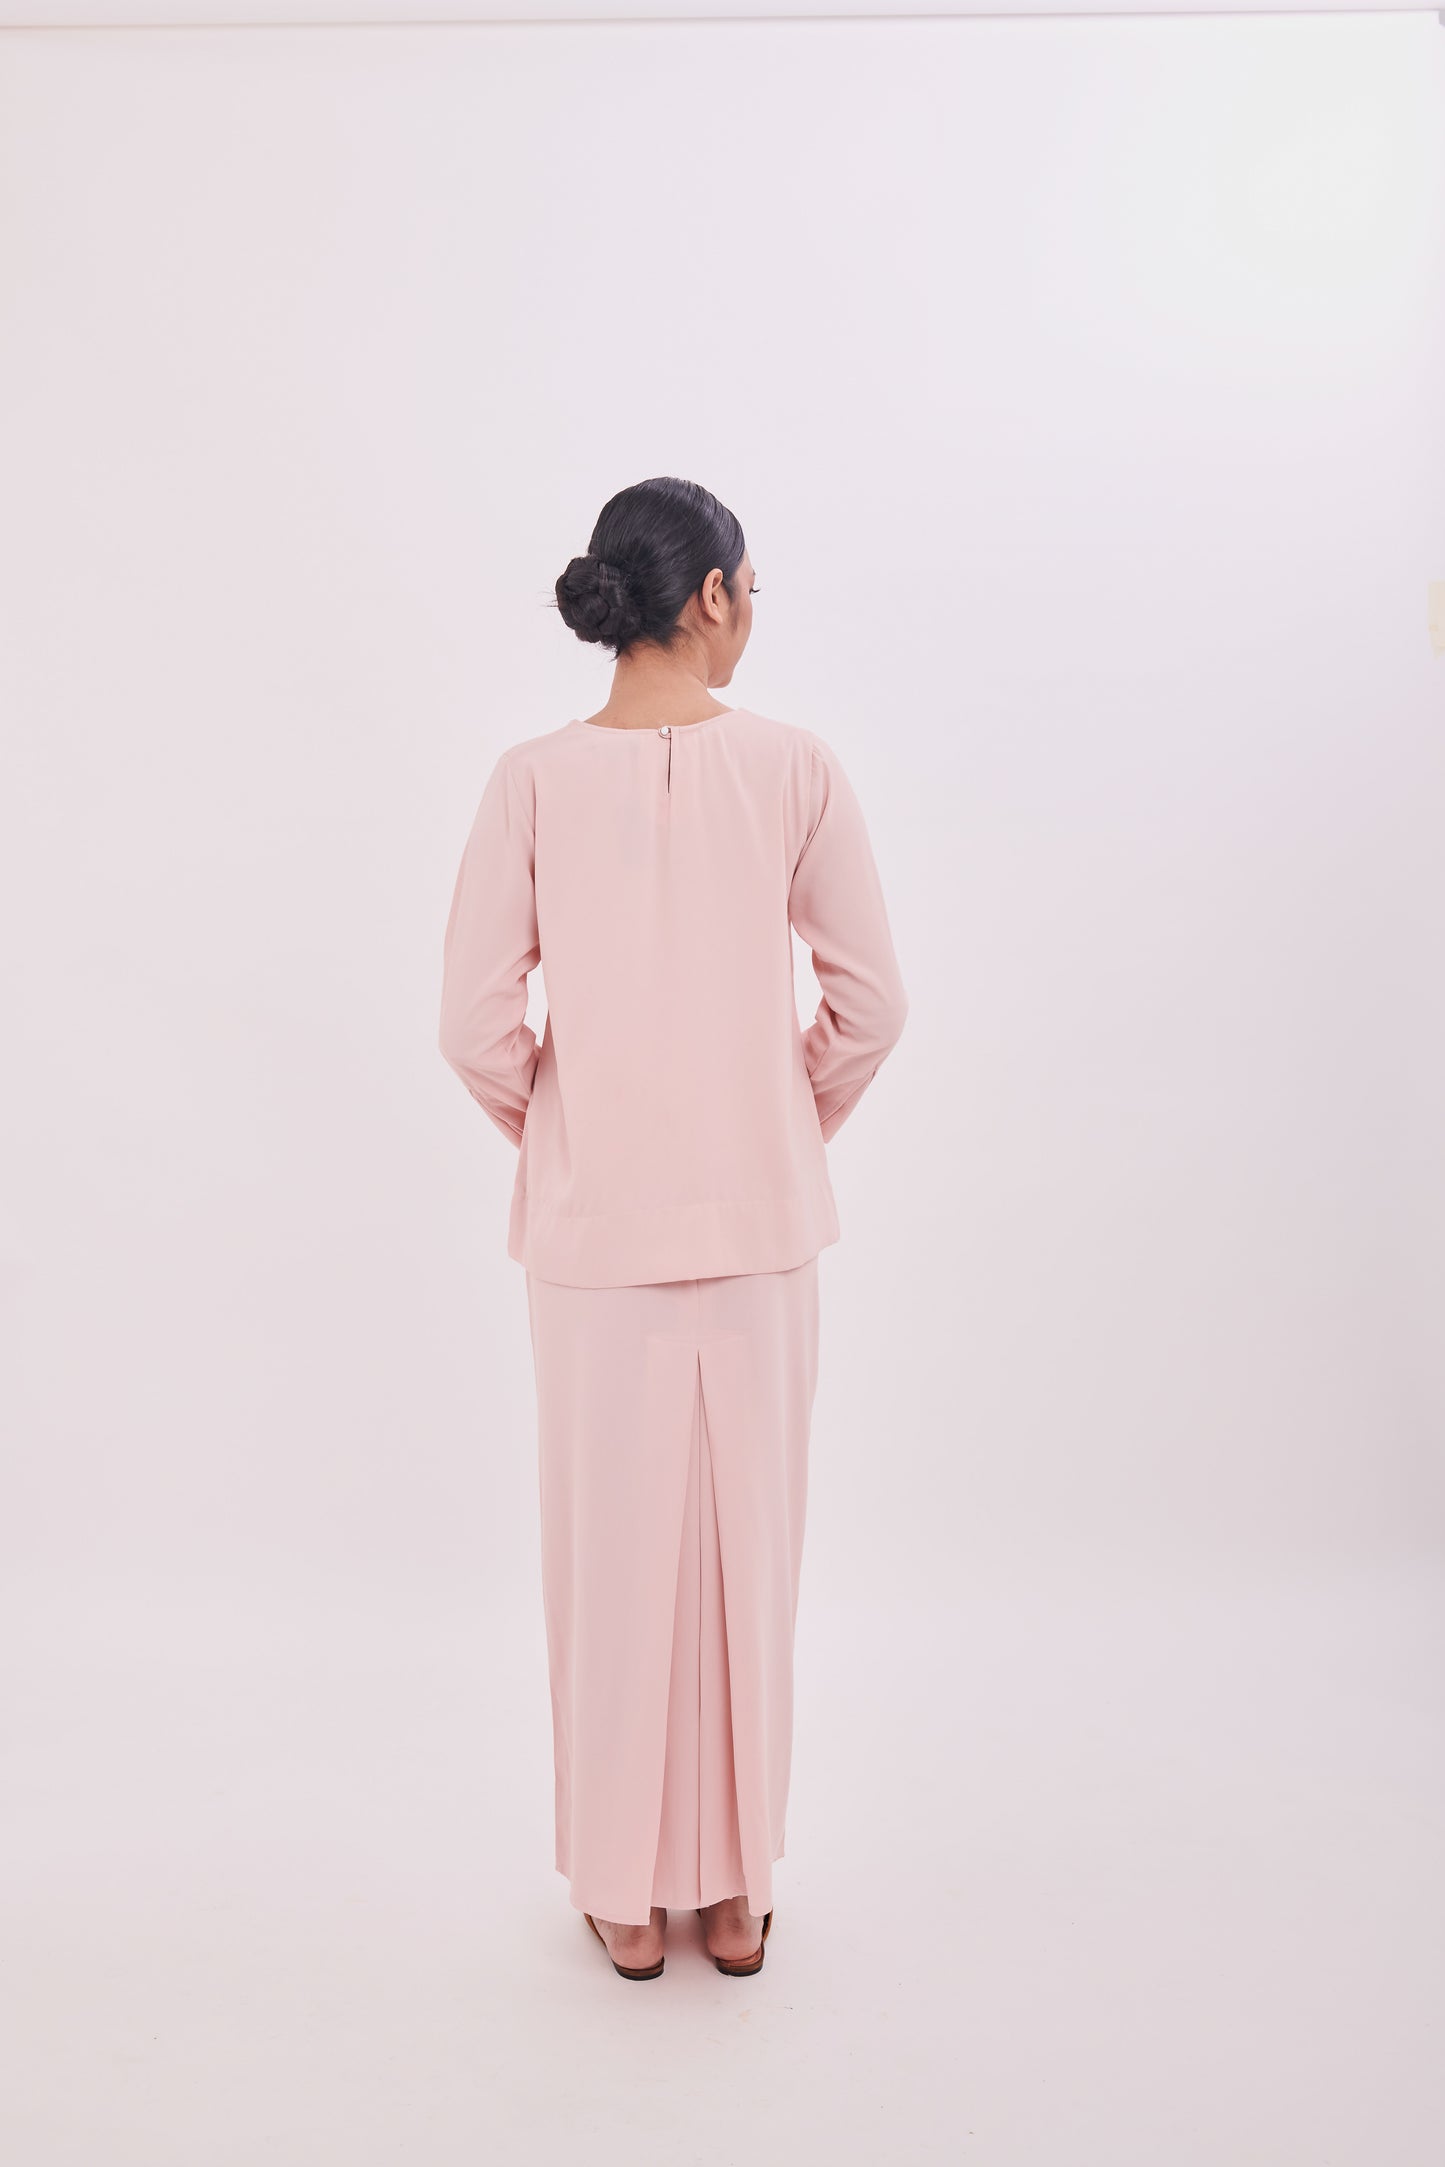 Edza Scallop Top in Pink